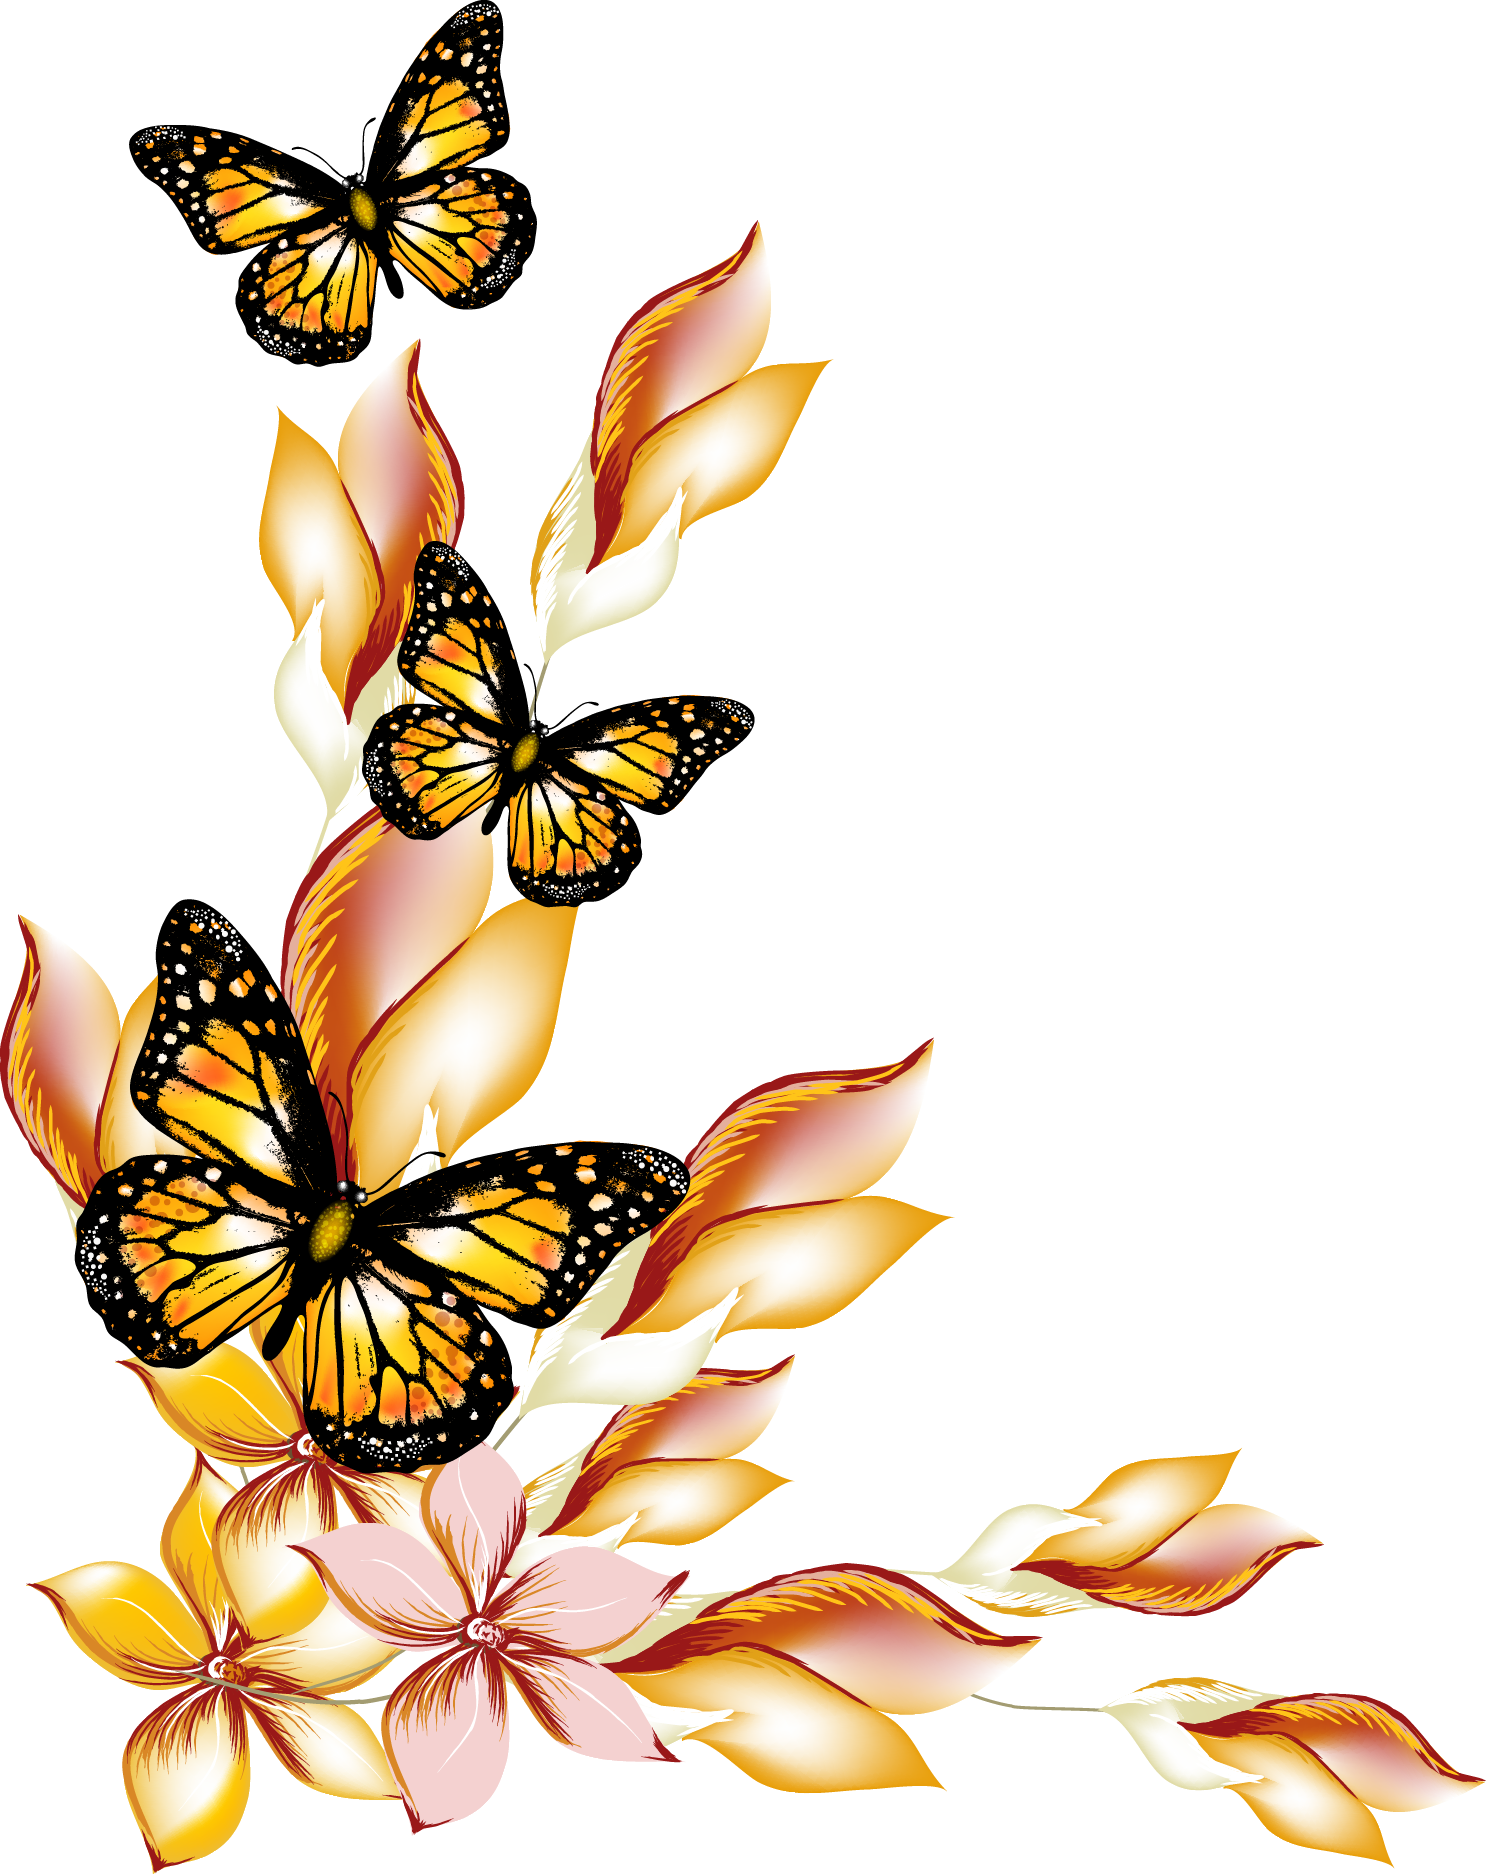 Butterfly And Flower Butterflies Vector Borders Flowers PNG Image